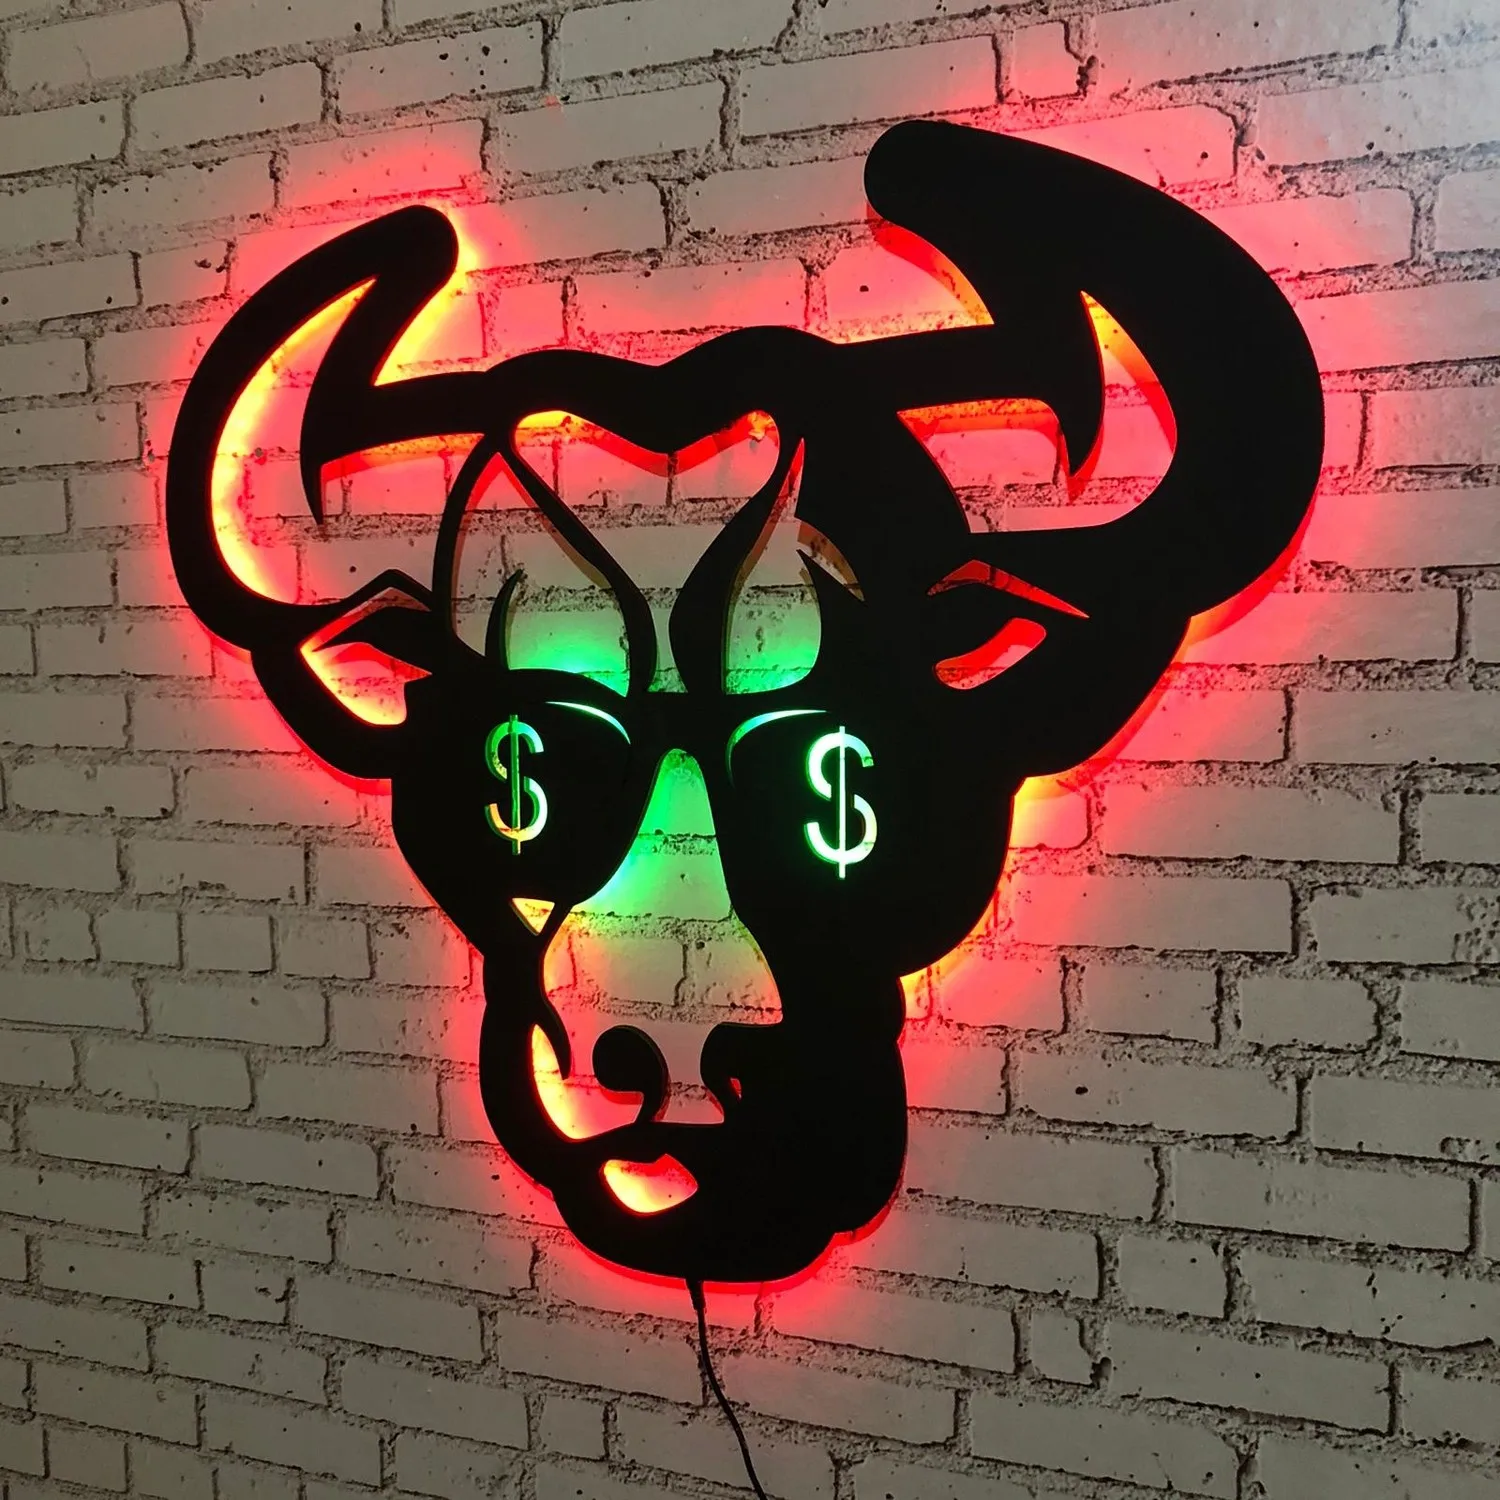 Gift Bull Pattern Illuminated Wooden Table/Wall Decor Rgb Led Illuminated Wooden Mdf Decorative Table 50X50cm Fast Shipping From